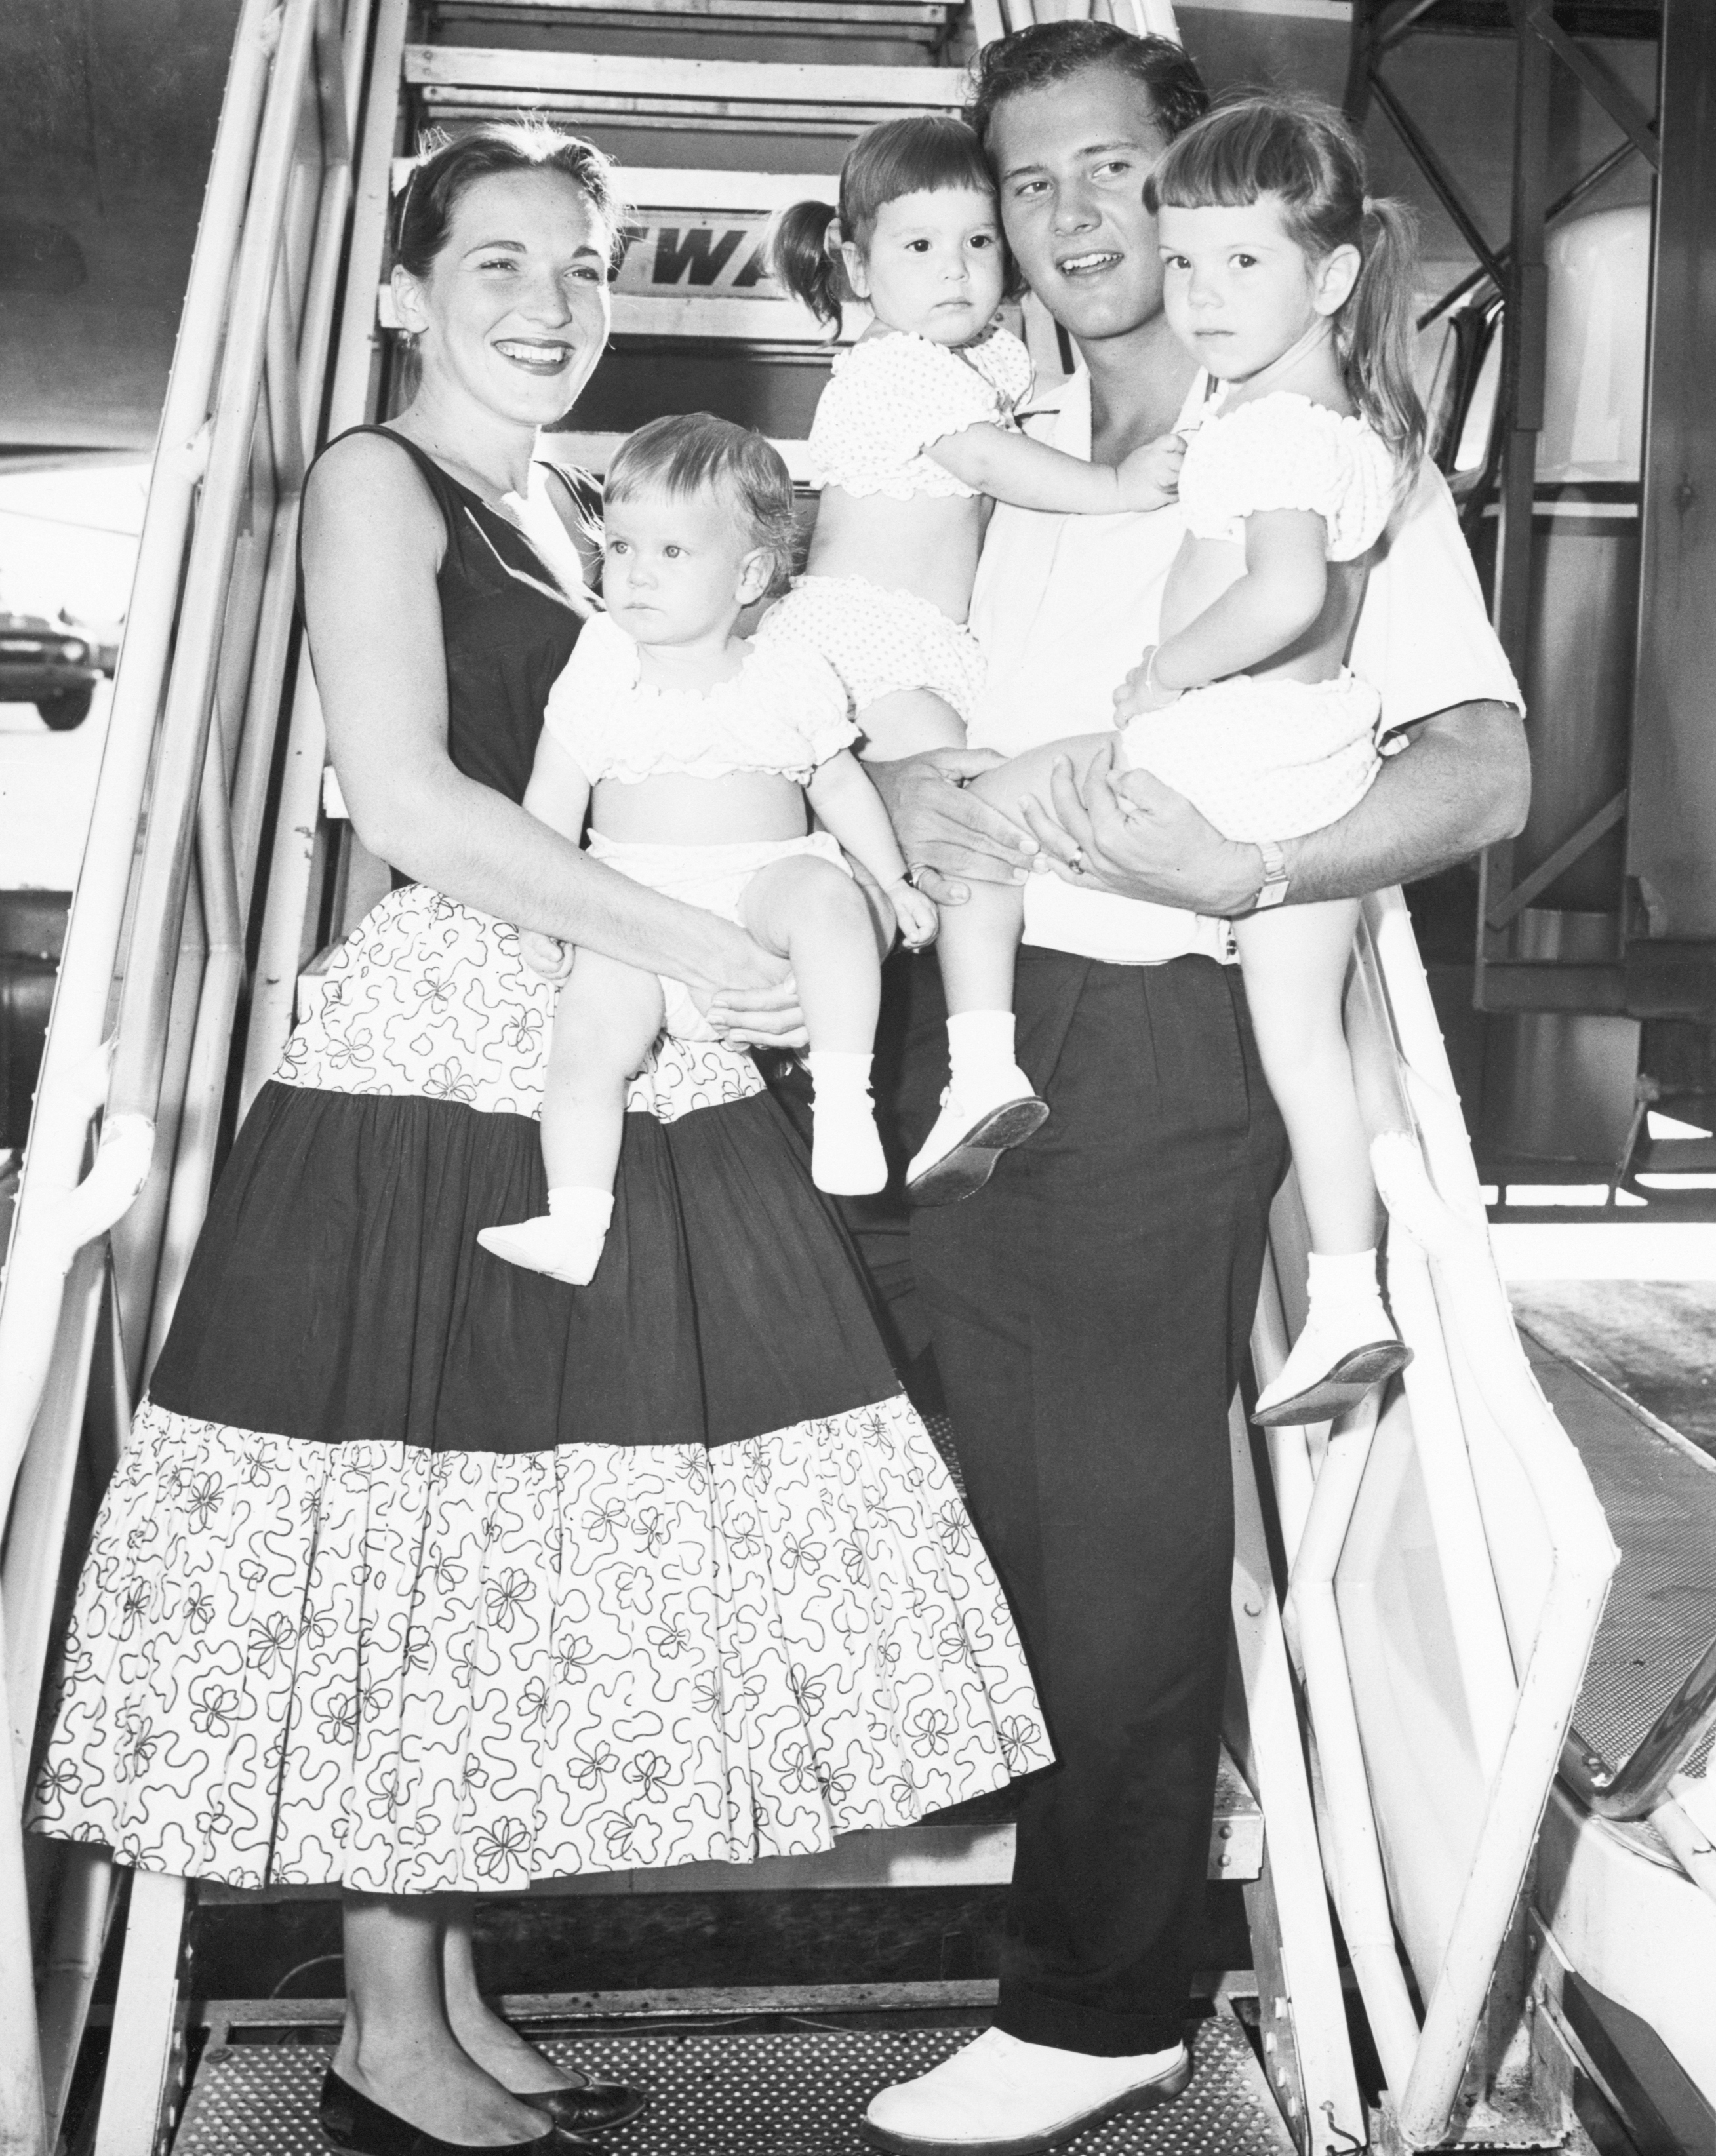 Pat and Shirley Boone with three of their daughters boarding a plane in 1957 | Source: Getty Images